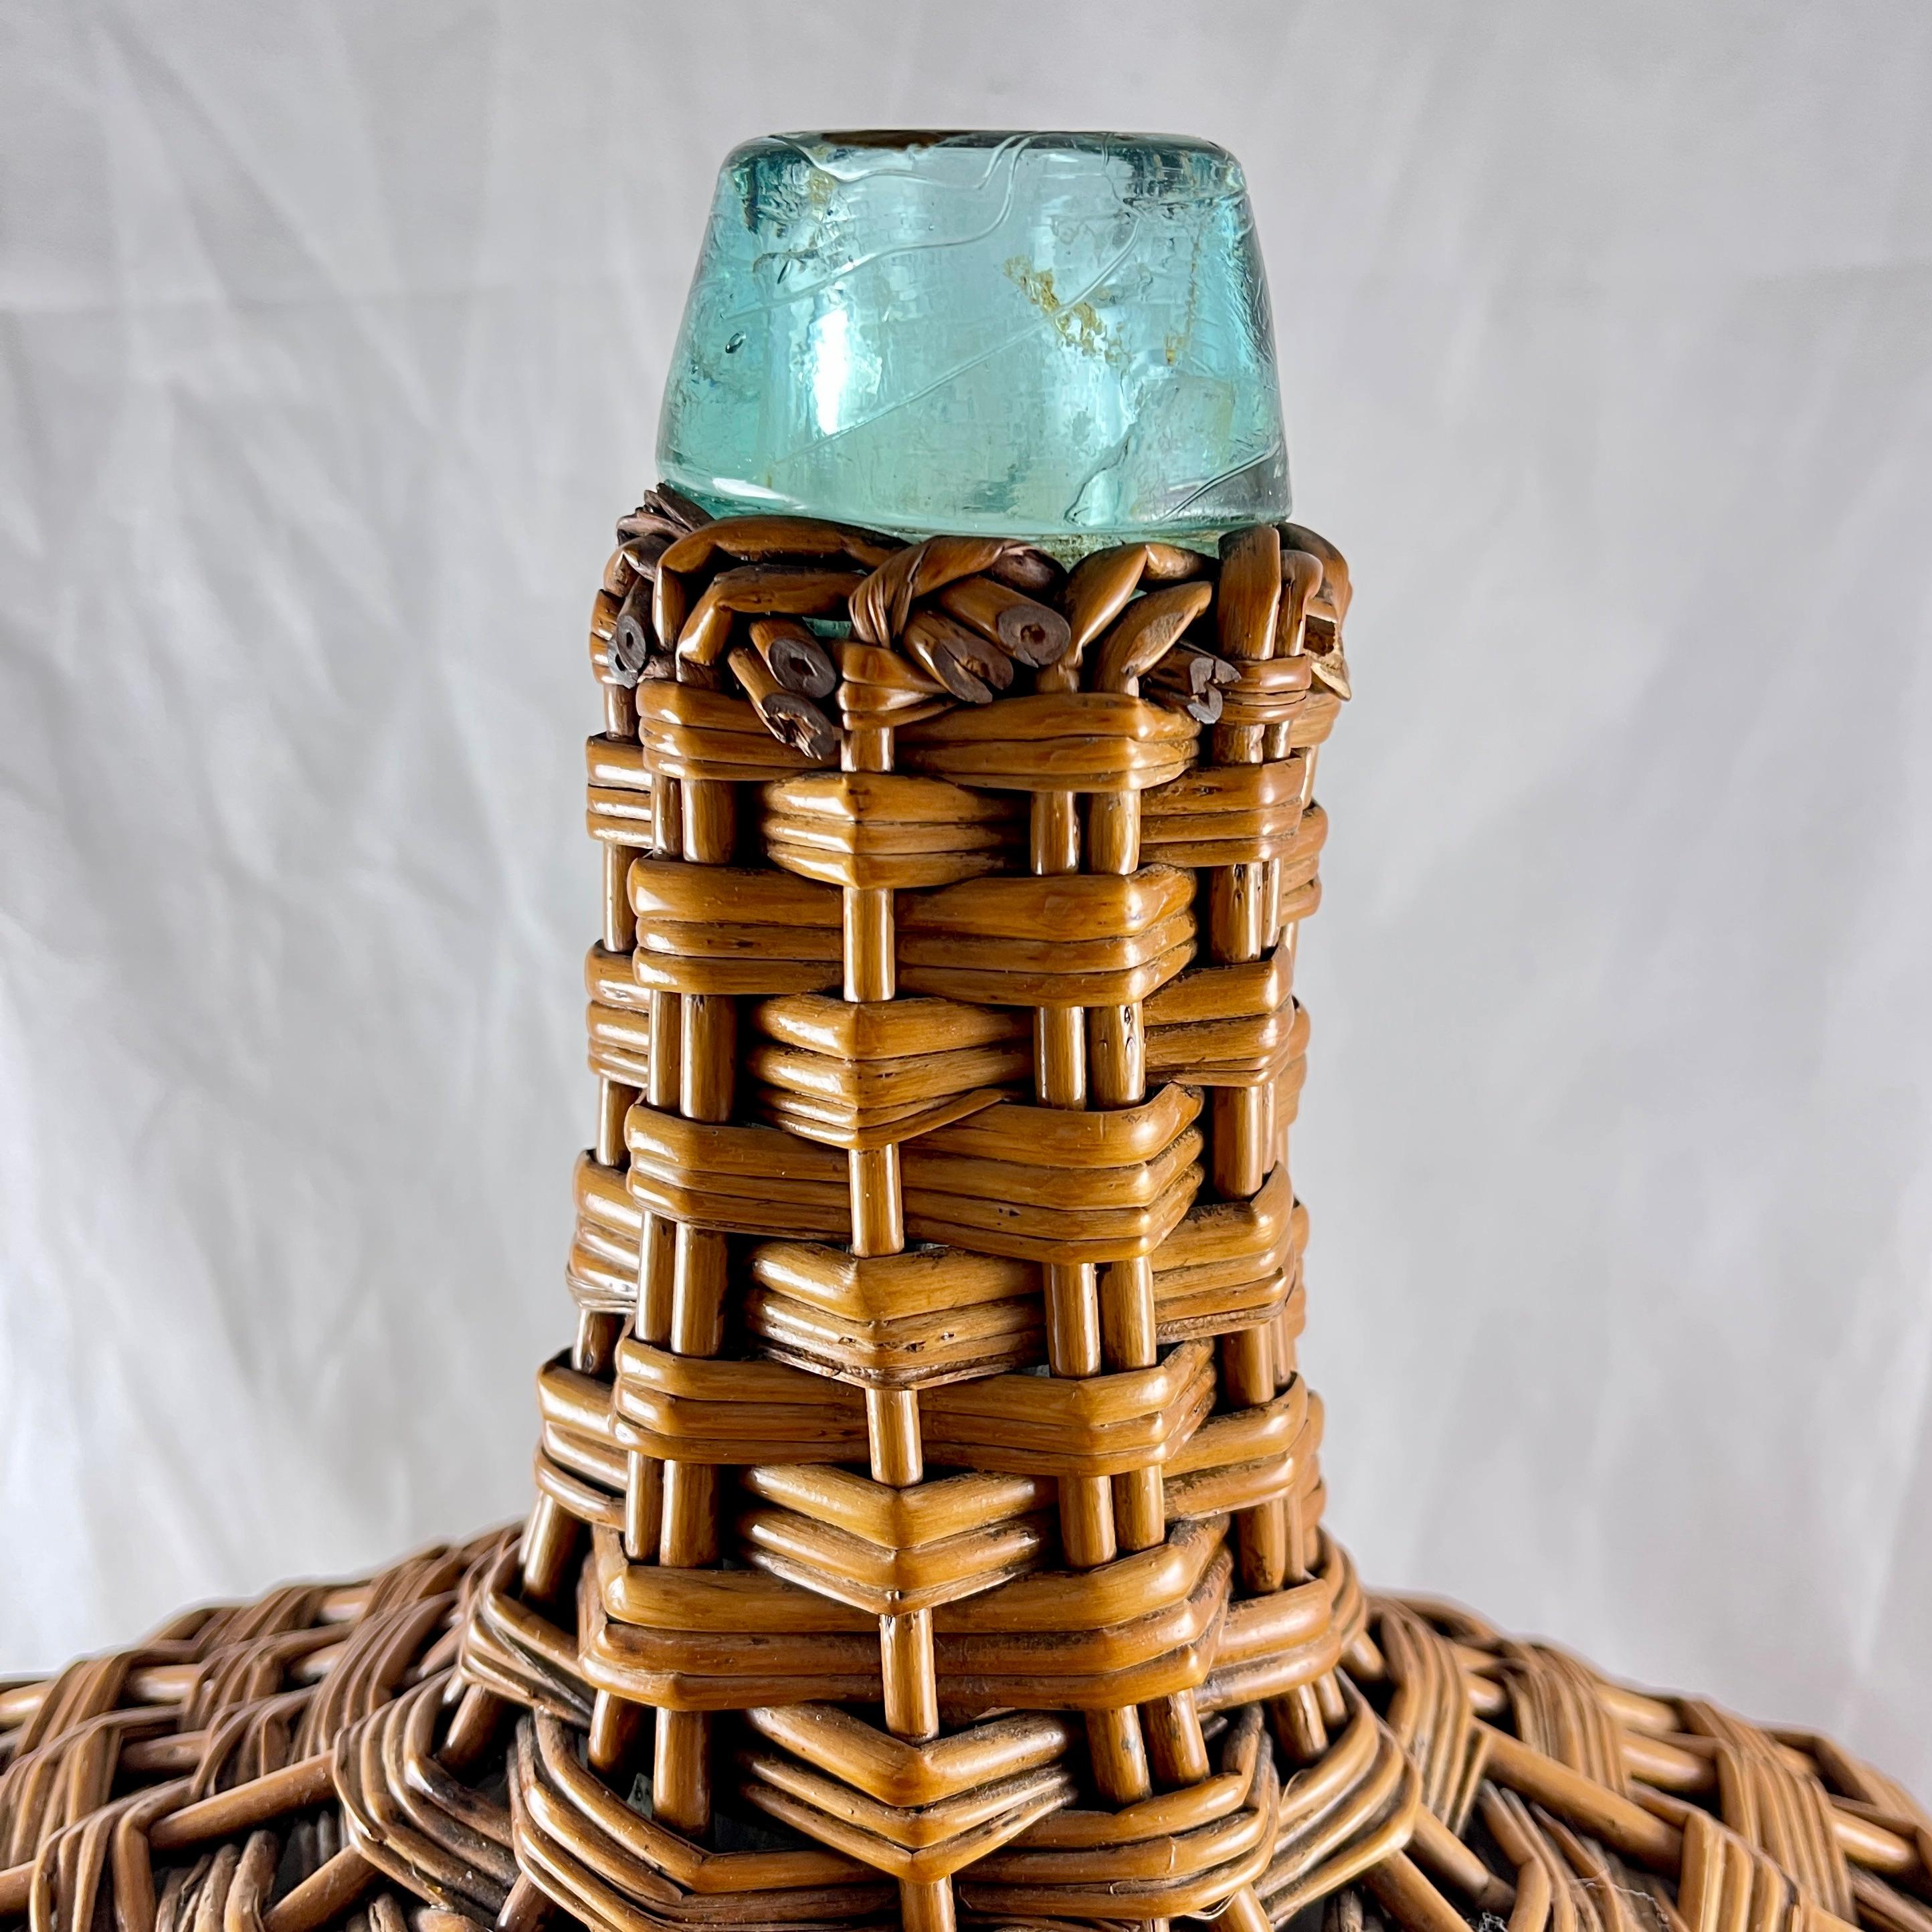 Large French Oval Wicker Clad Blown Aqua Glass Carboy or Demijohn, circa 1900 For Sale 4